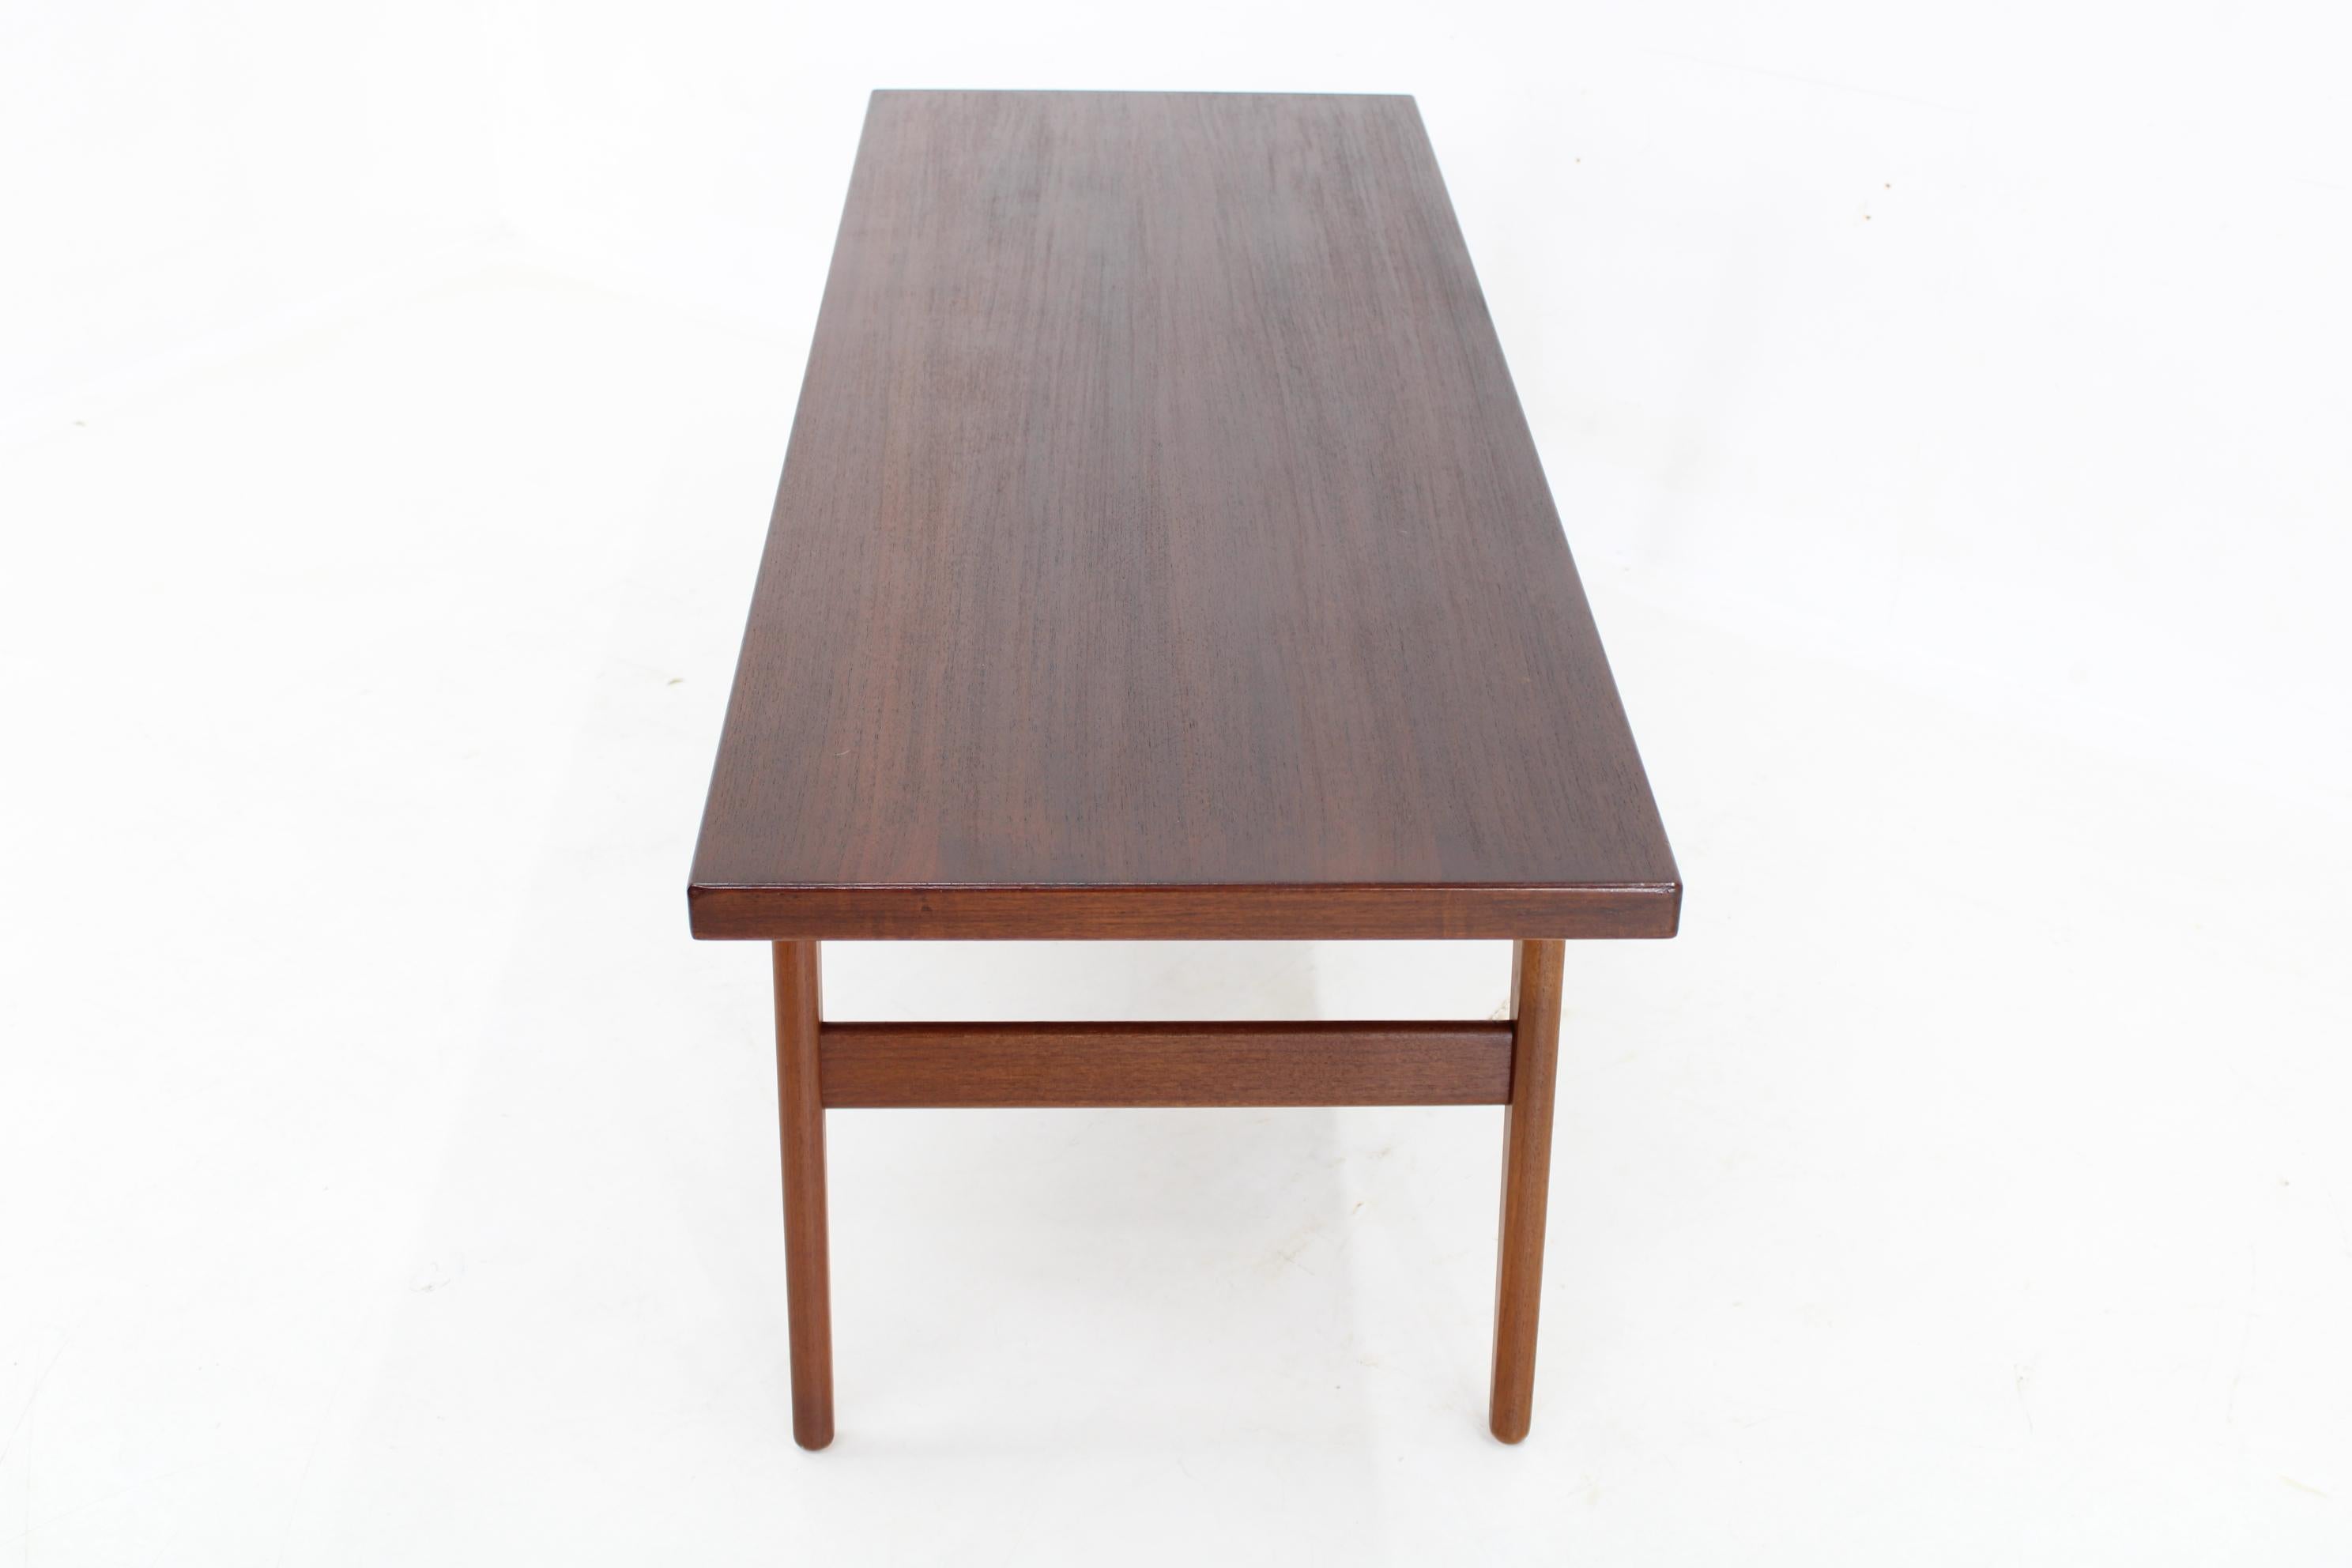 1960s Teak Coffee Table by Clausen and Son for Silkeborg, Denmark  For Sale 1